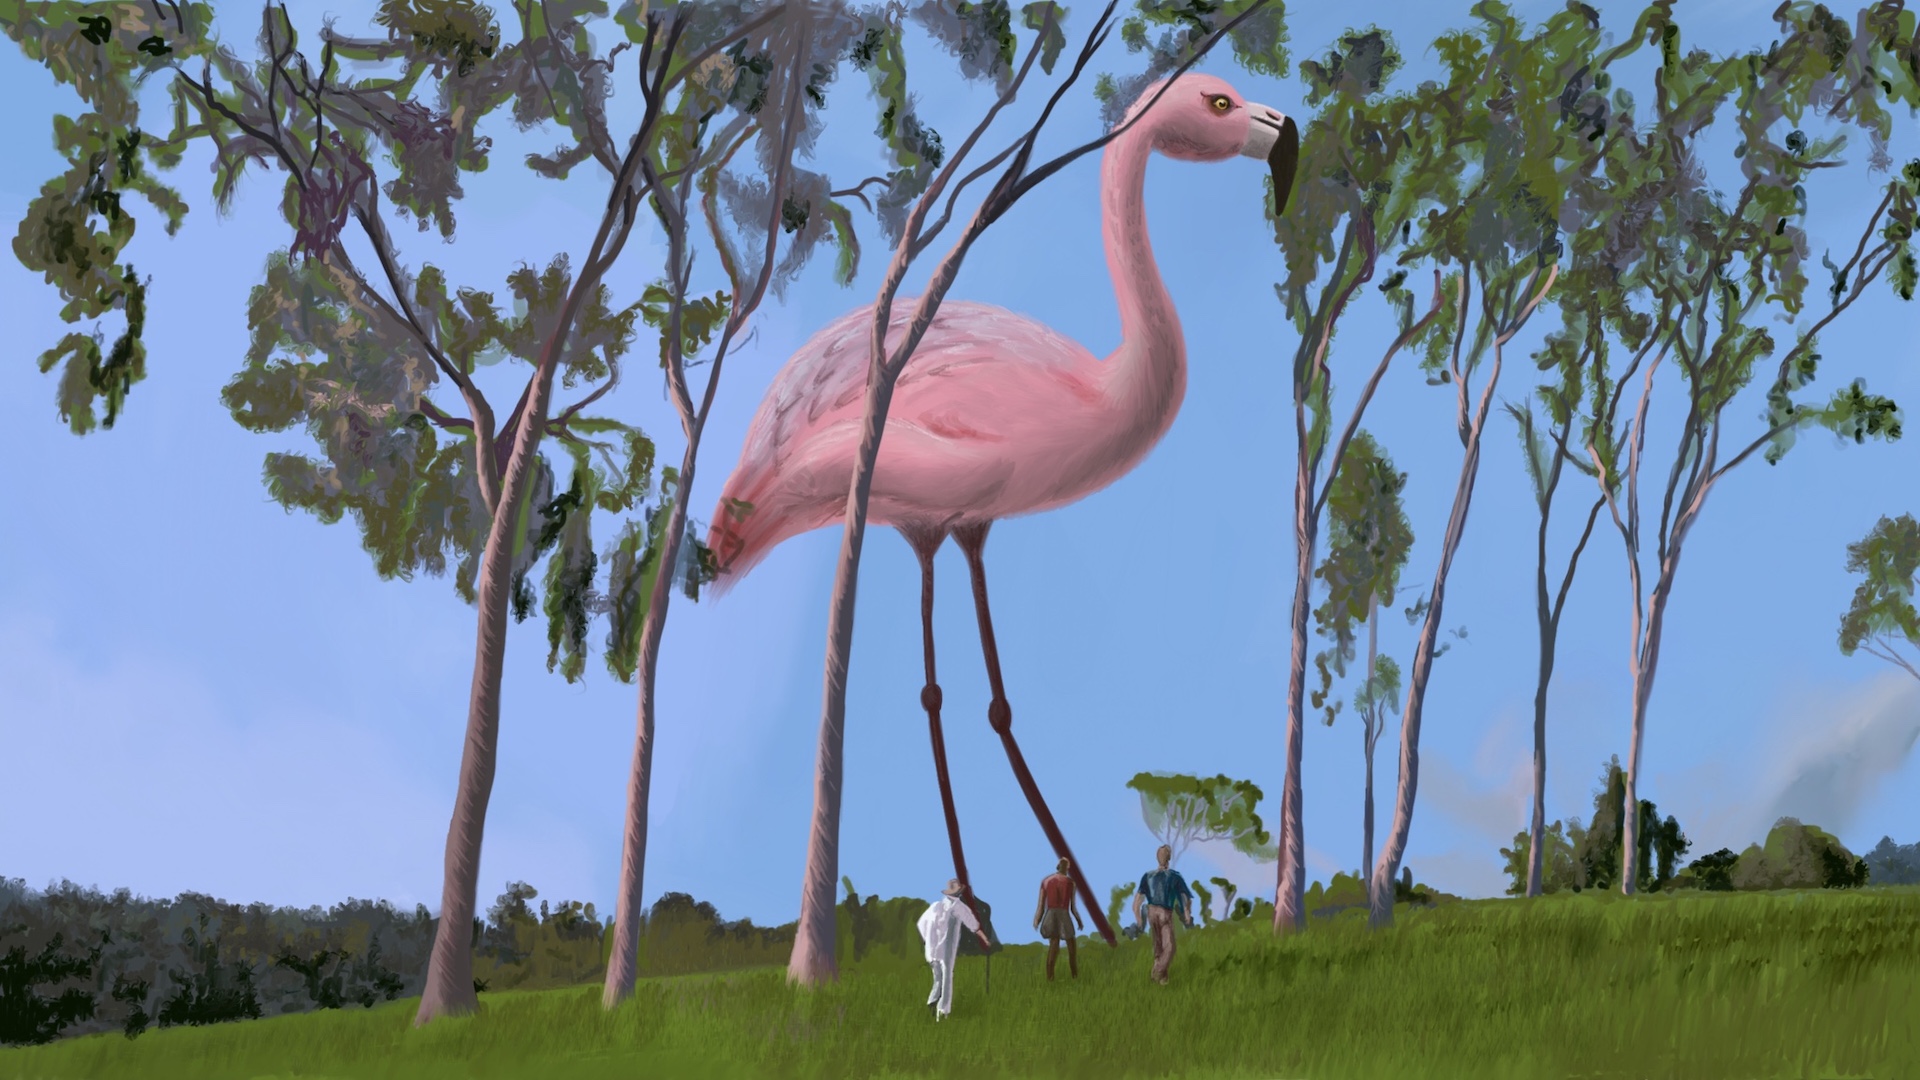 Digitally painted reproduction of of a frame from Jurassic Park, with a giant flamingo instead of the brachiosaurus.